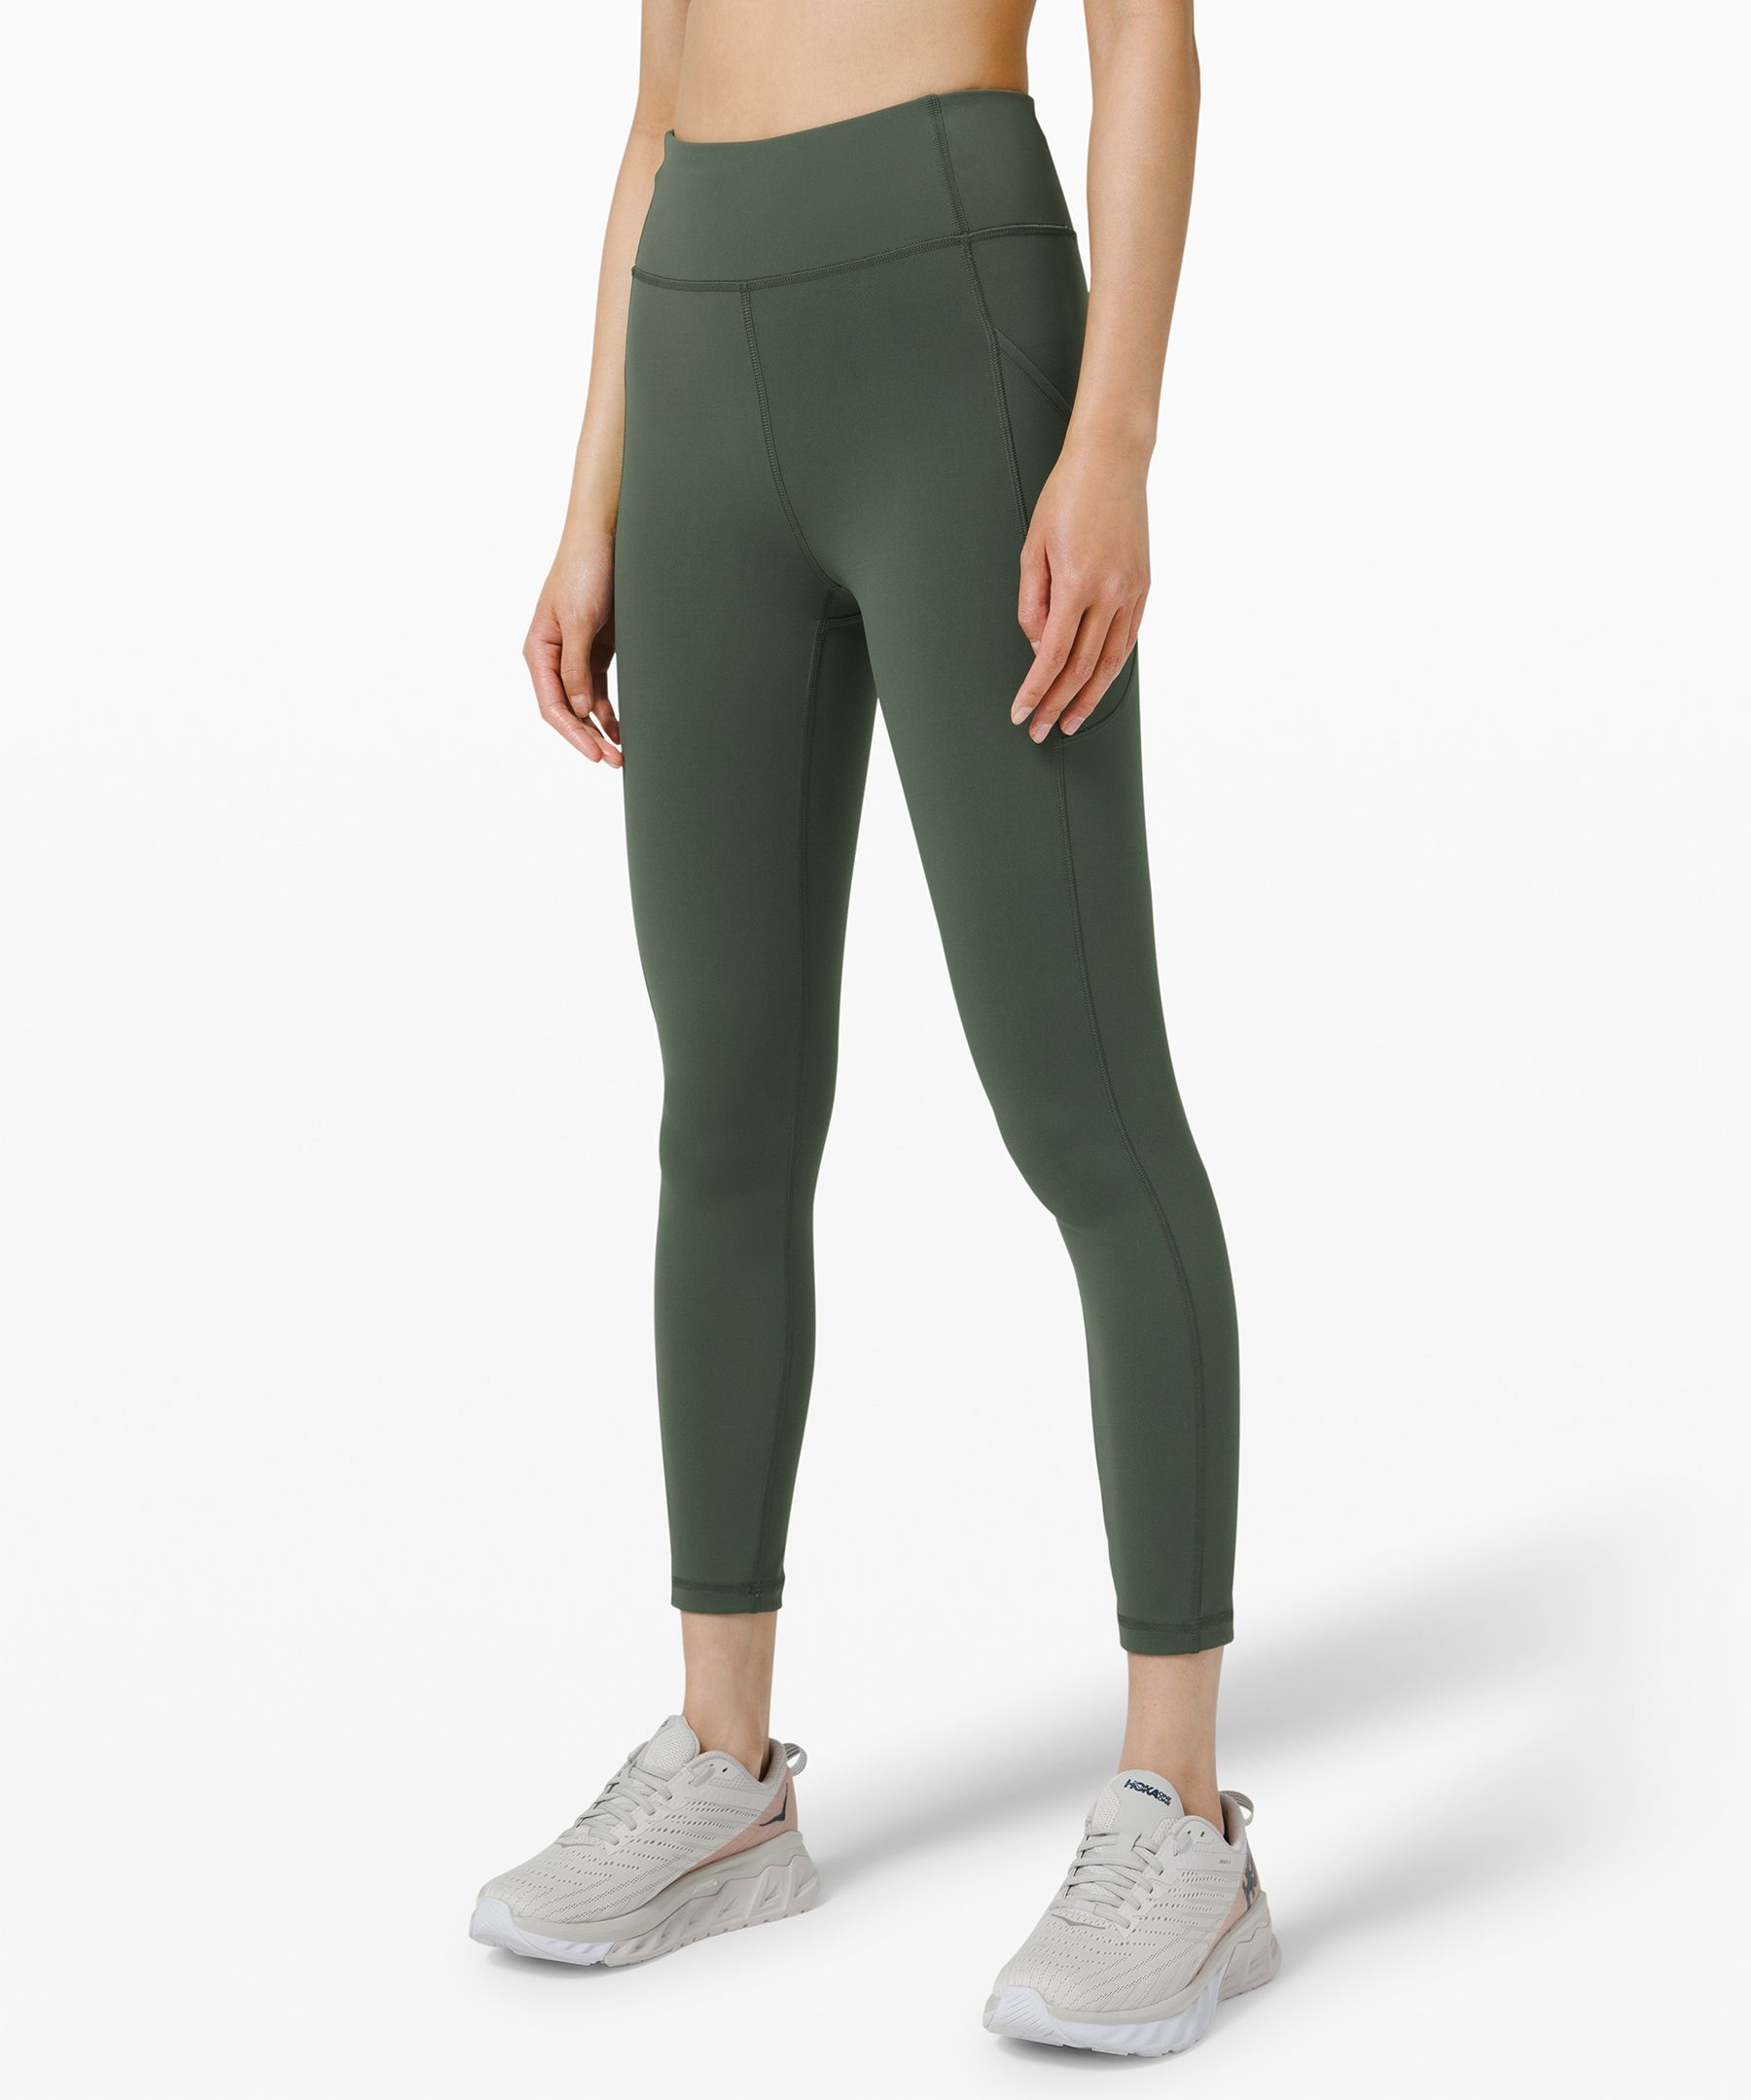 Lululemon Invigorate High-rise Tights 25" In Smoked Spruce